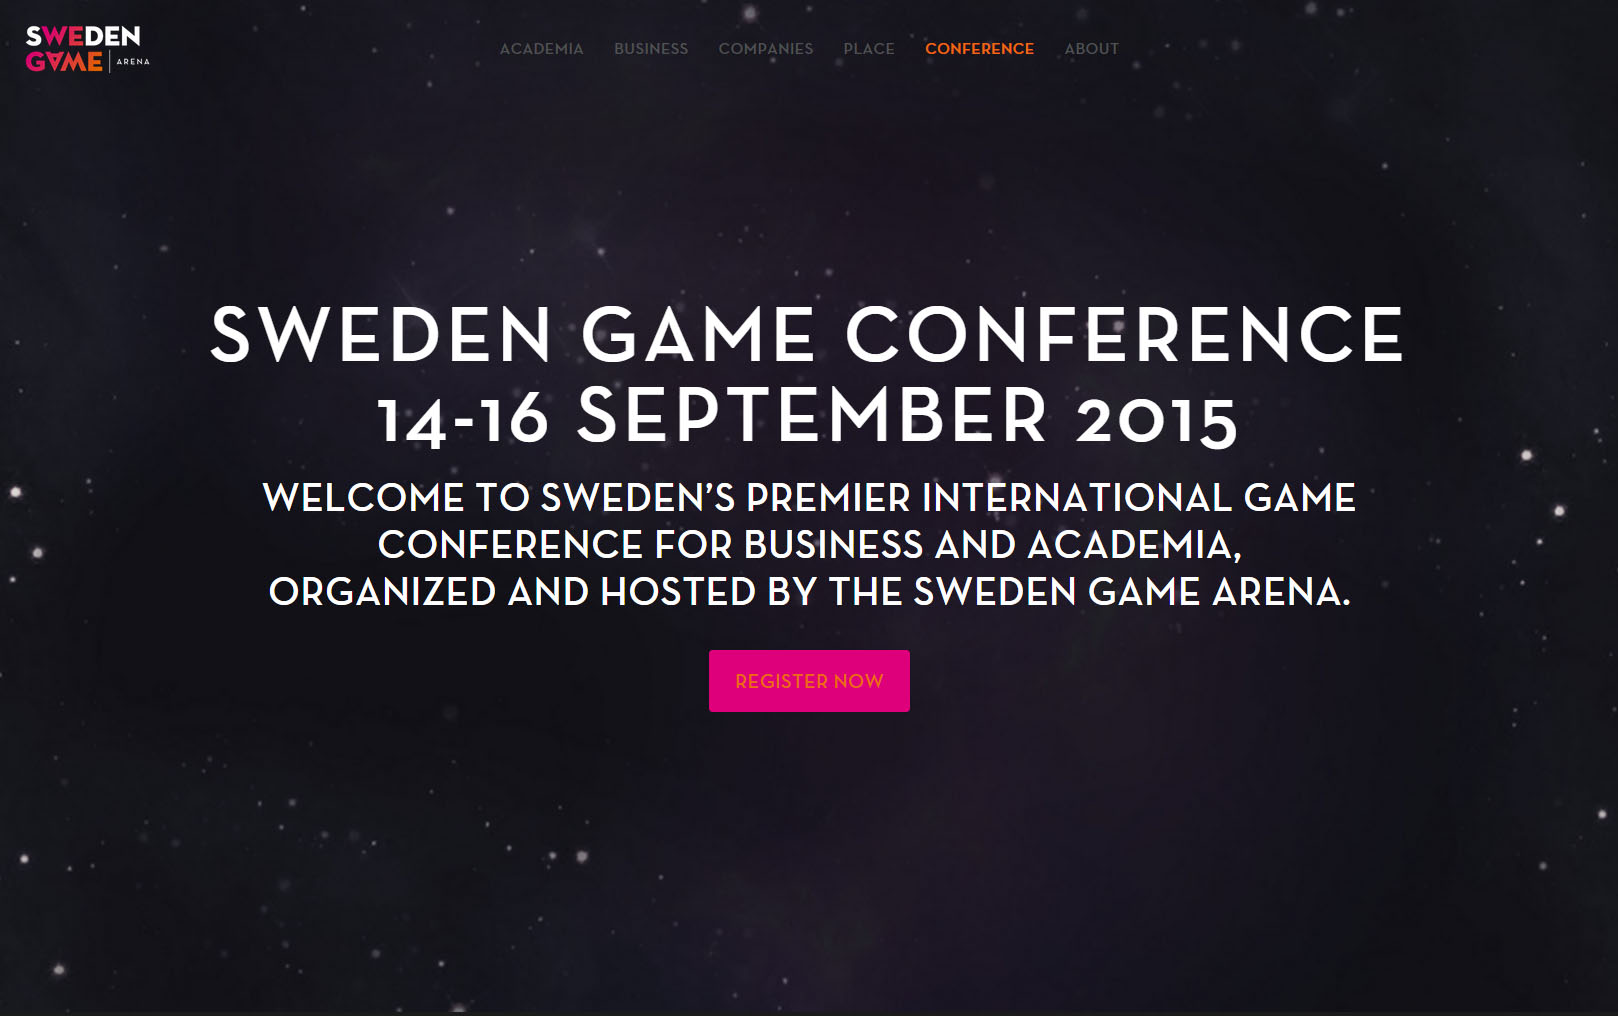 1 year at S.G. Arena and the Sweden Game Conference